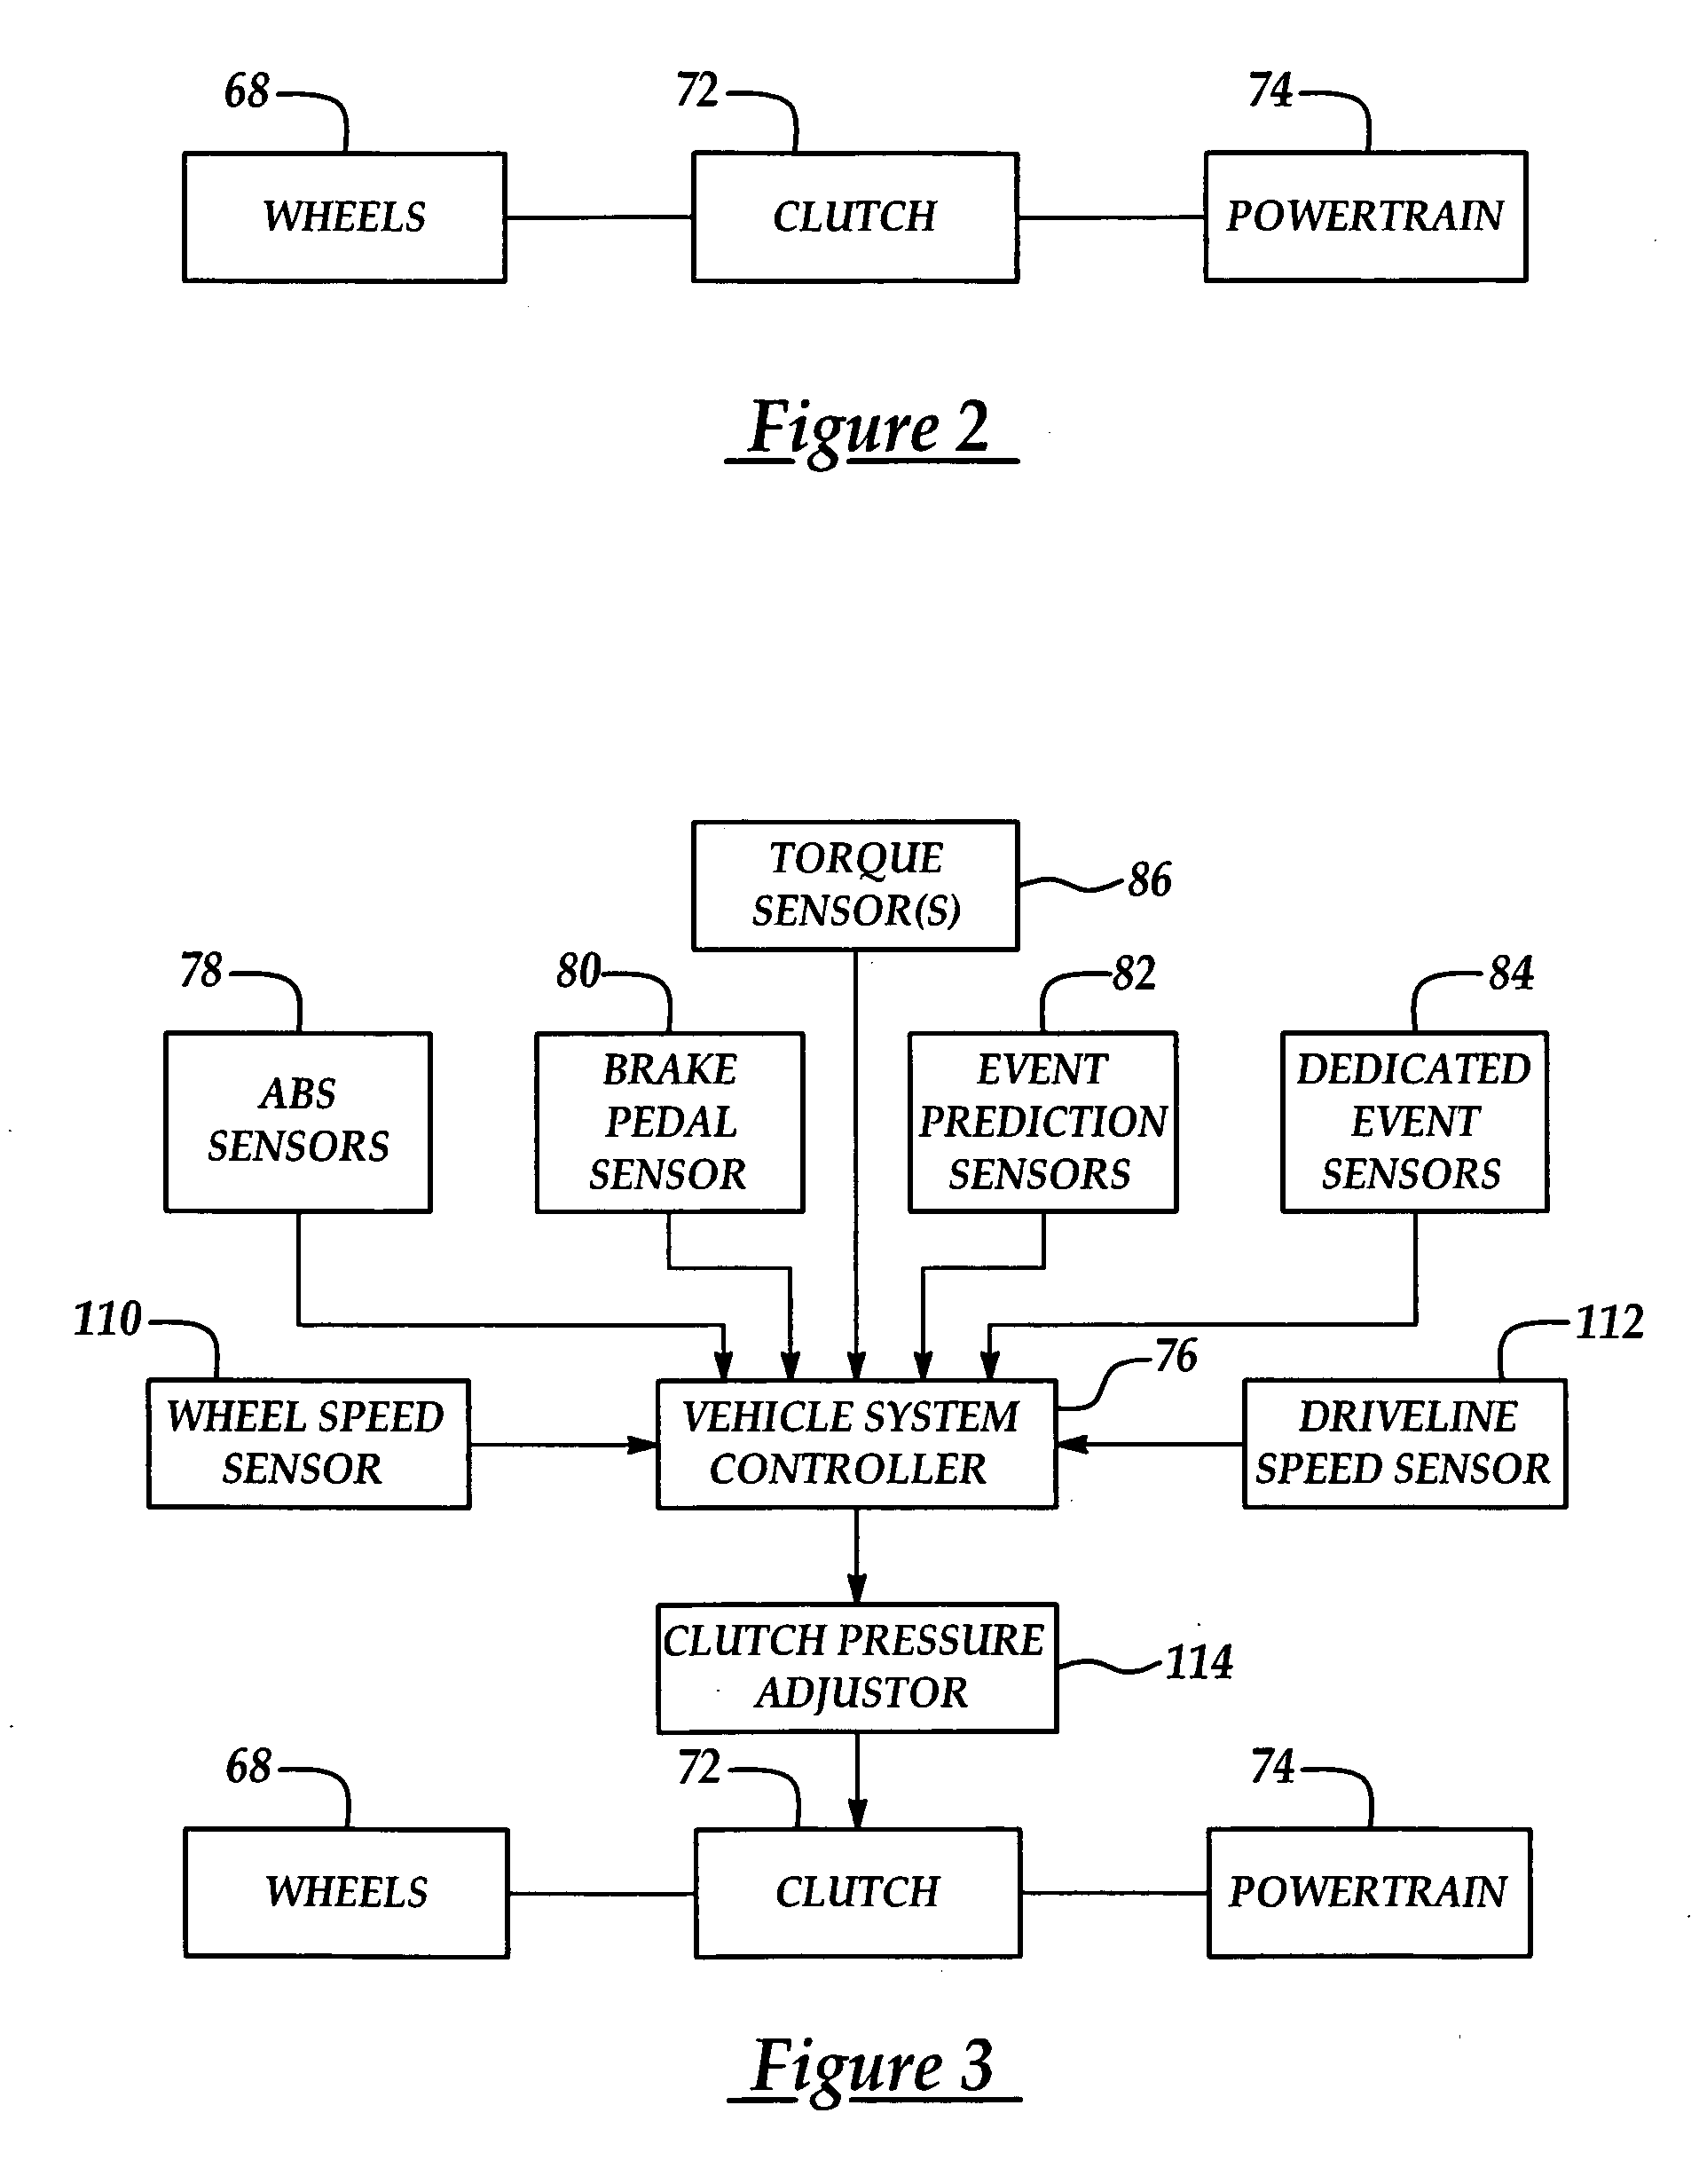 System for limiting reactive torque in powertrains